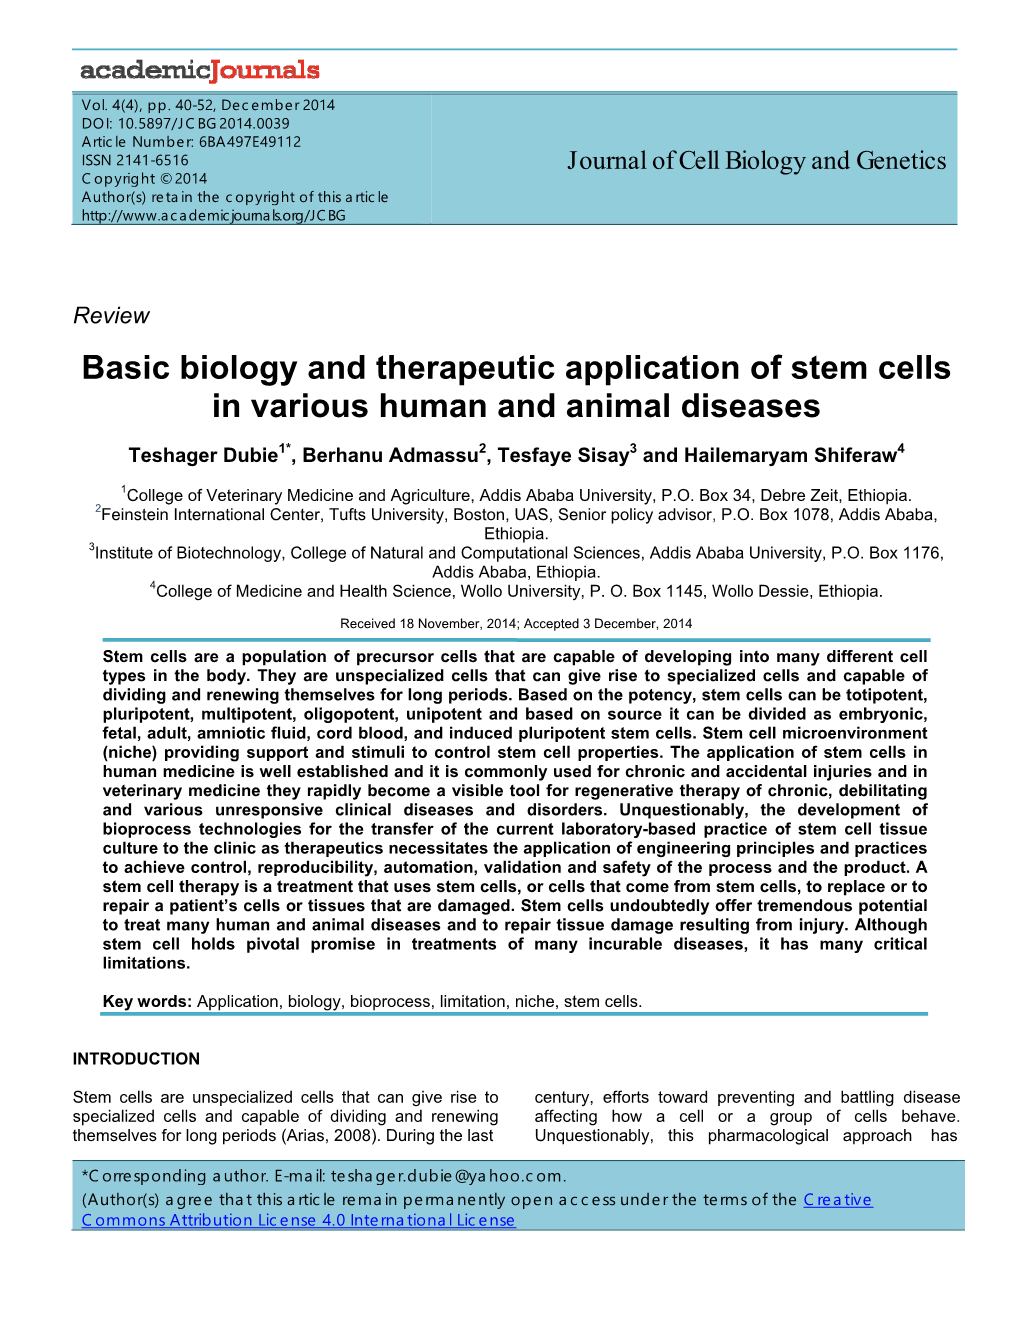 Basic Biology and Therapeutic Application of Stem Cells in Various Human and Animal Diseases